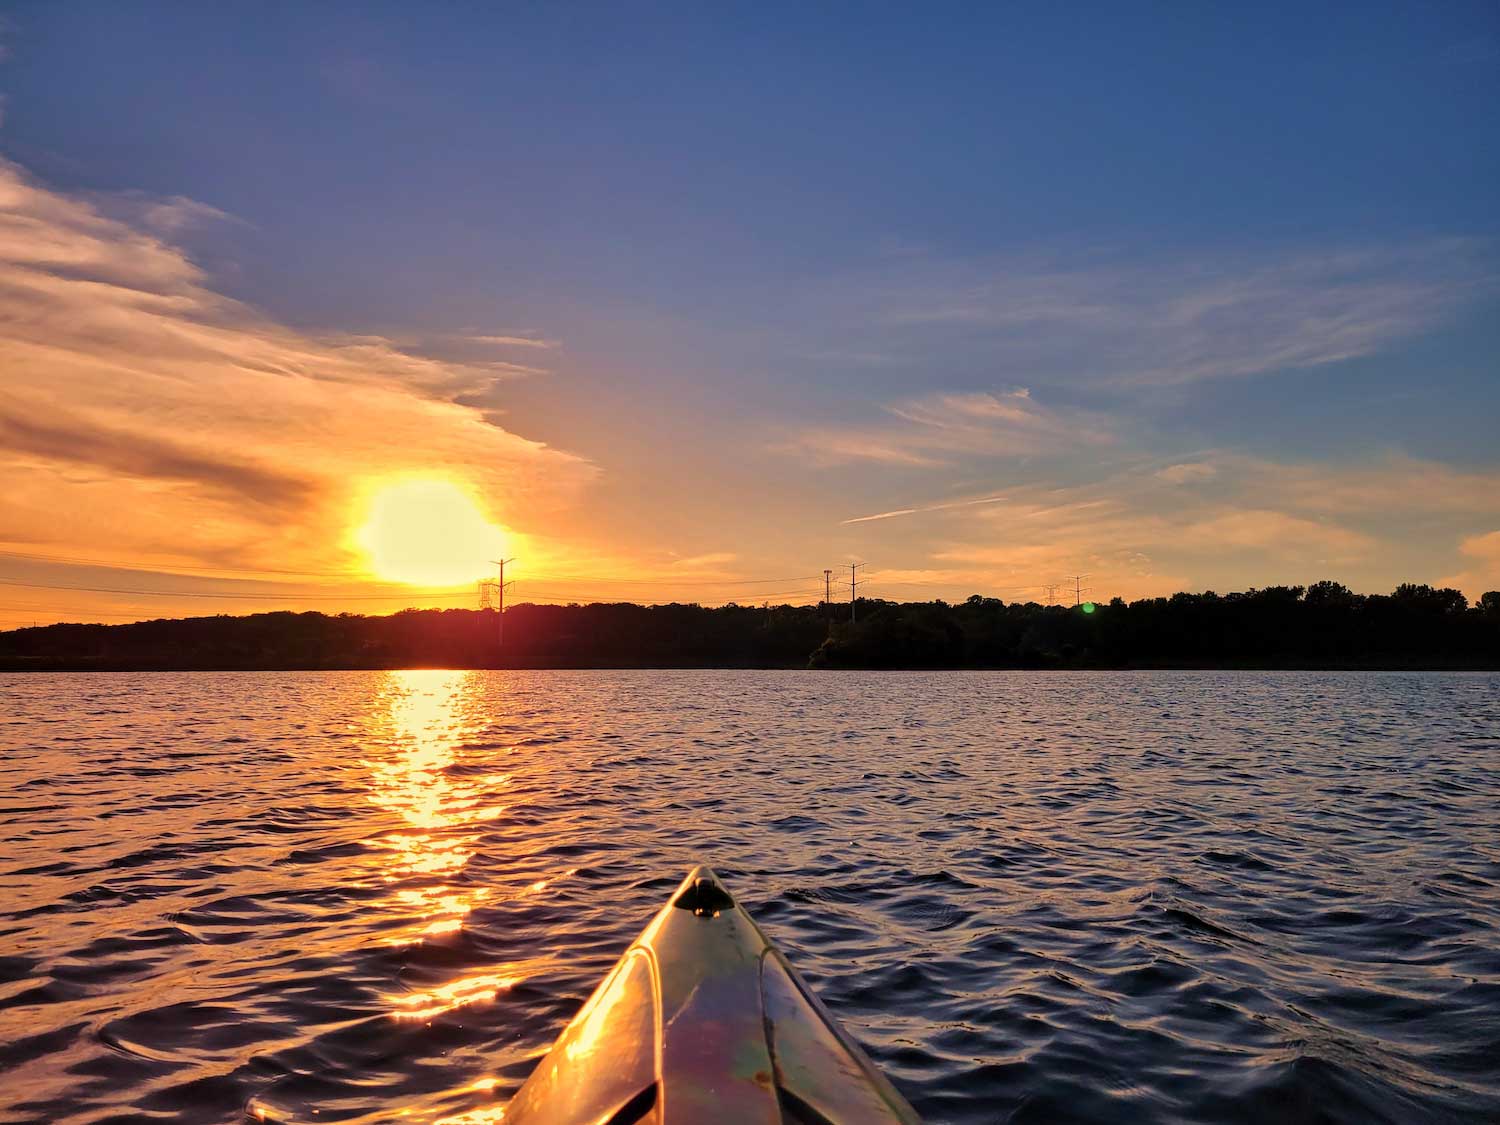 The front of a kayak on open water with a colorful sunset in the background